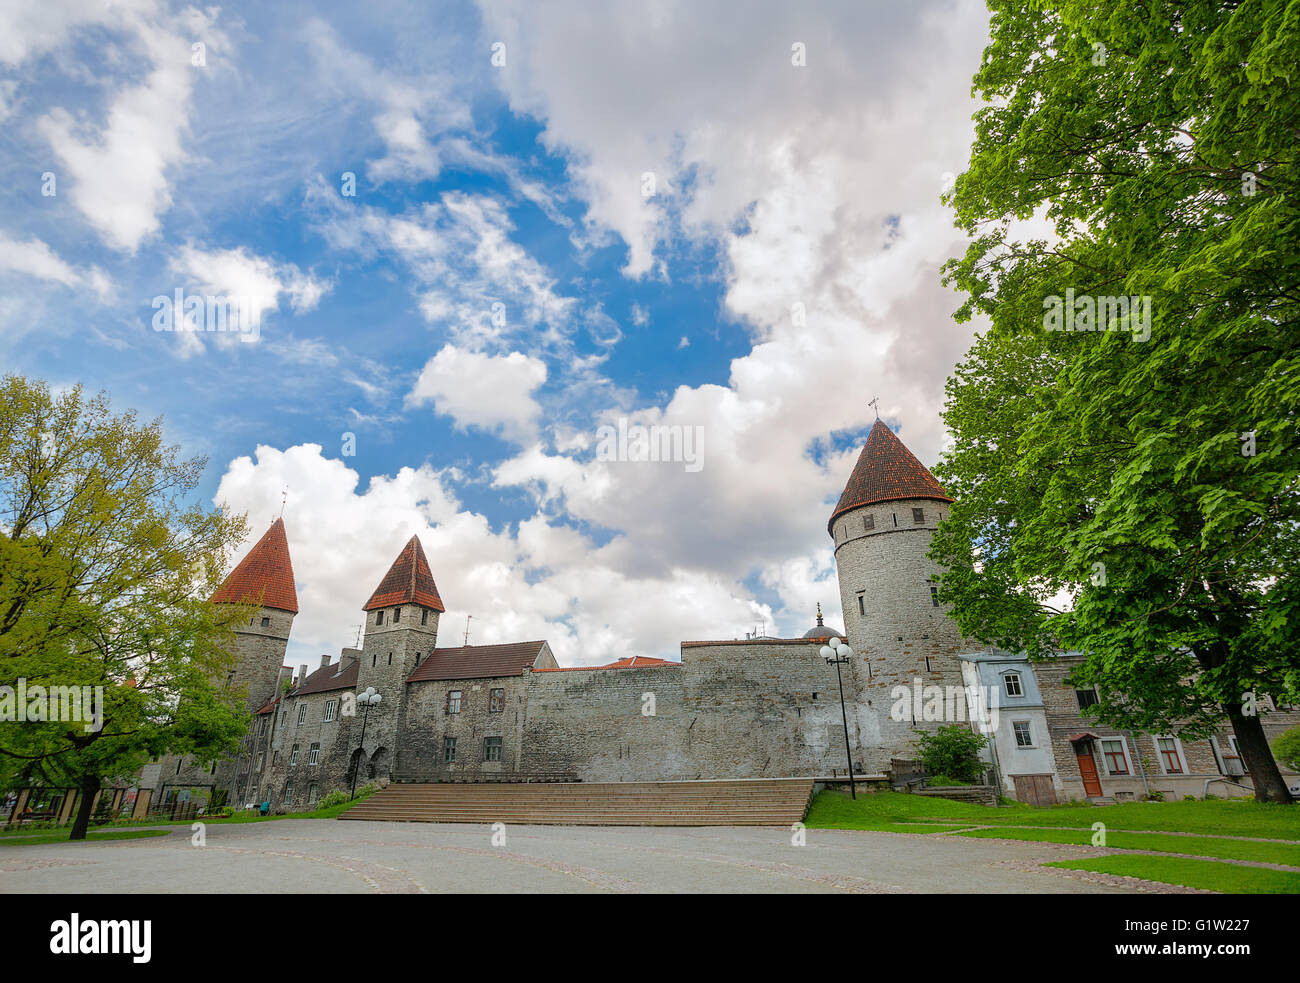 Fortification wall with turrets in old town of Tallinn. Estonia Stock Photo